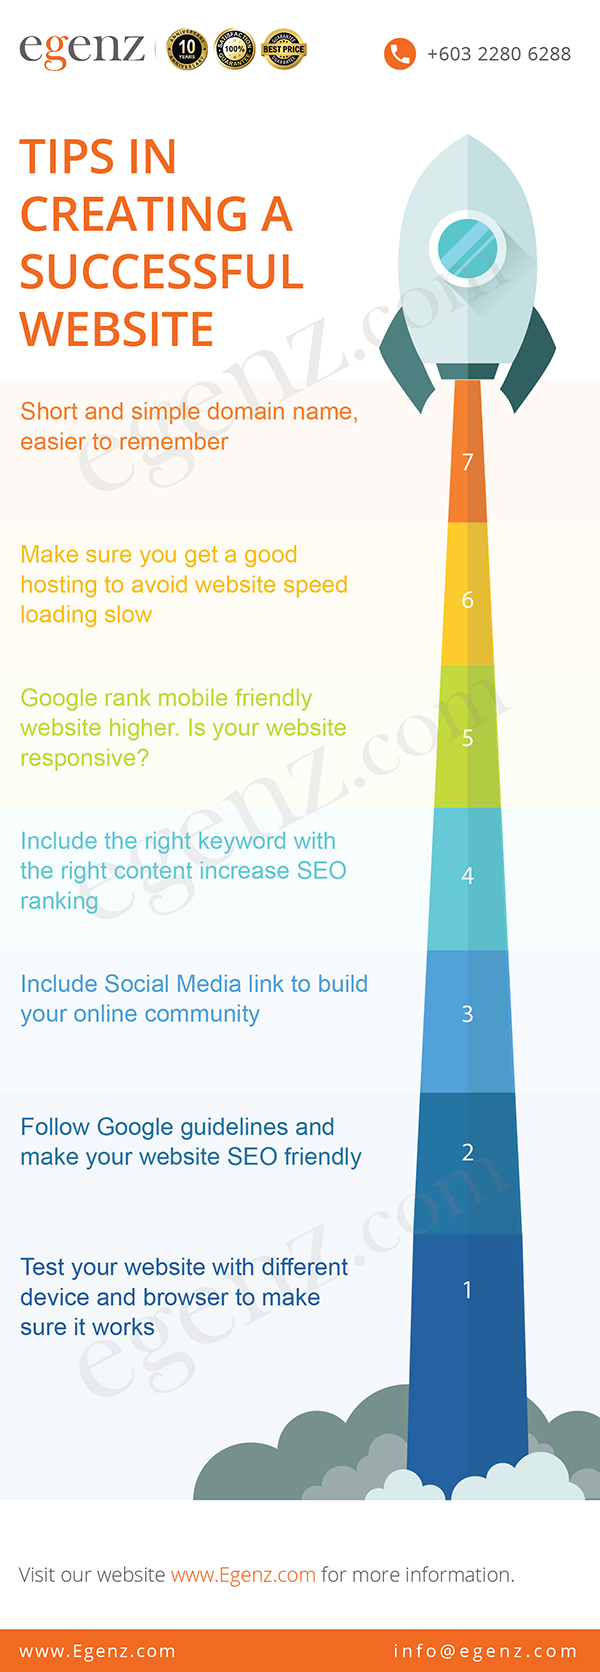 Infographic-Tips-In-Creating-A-Successful-Website-Egenz.com